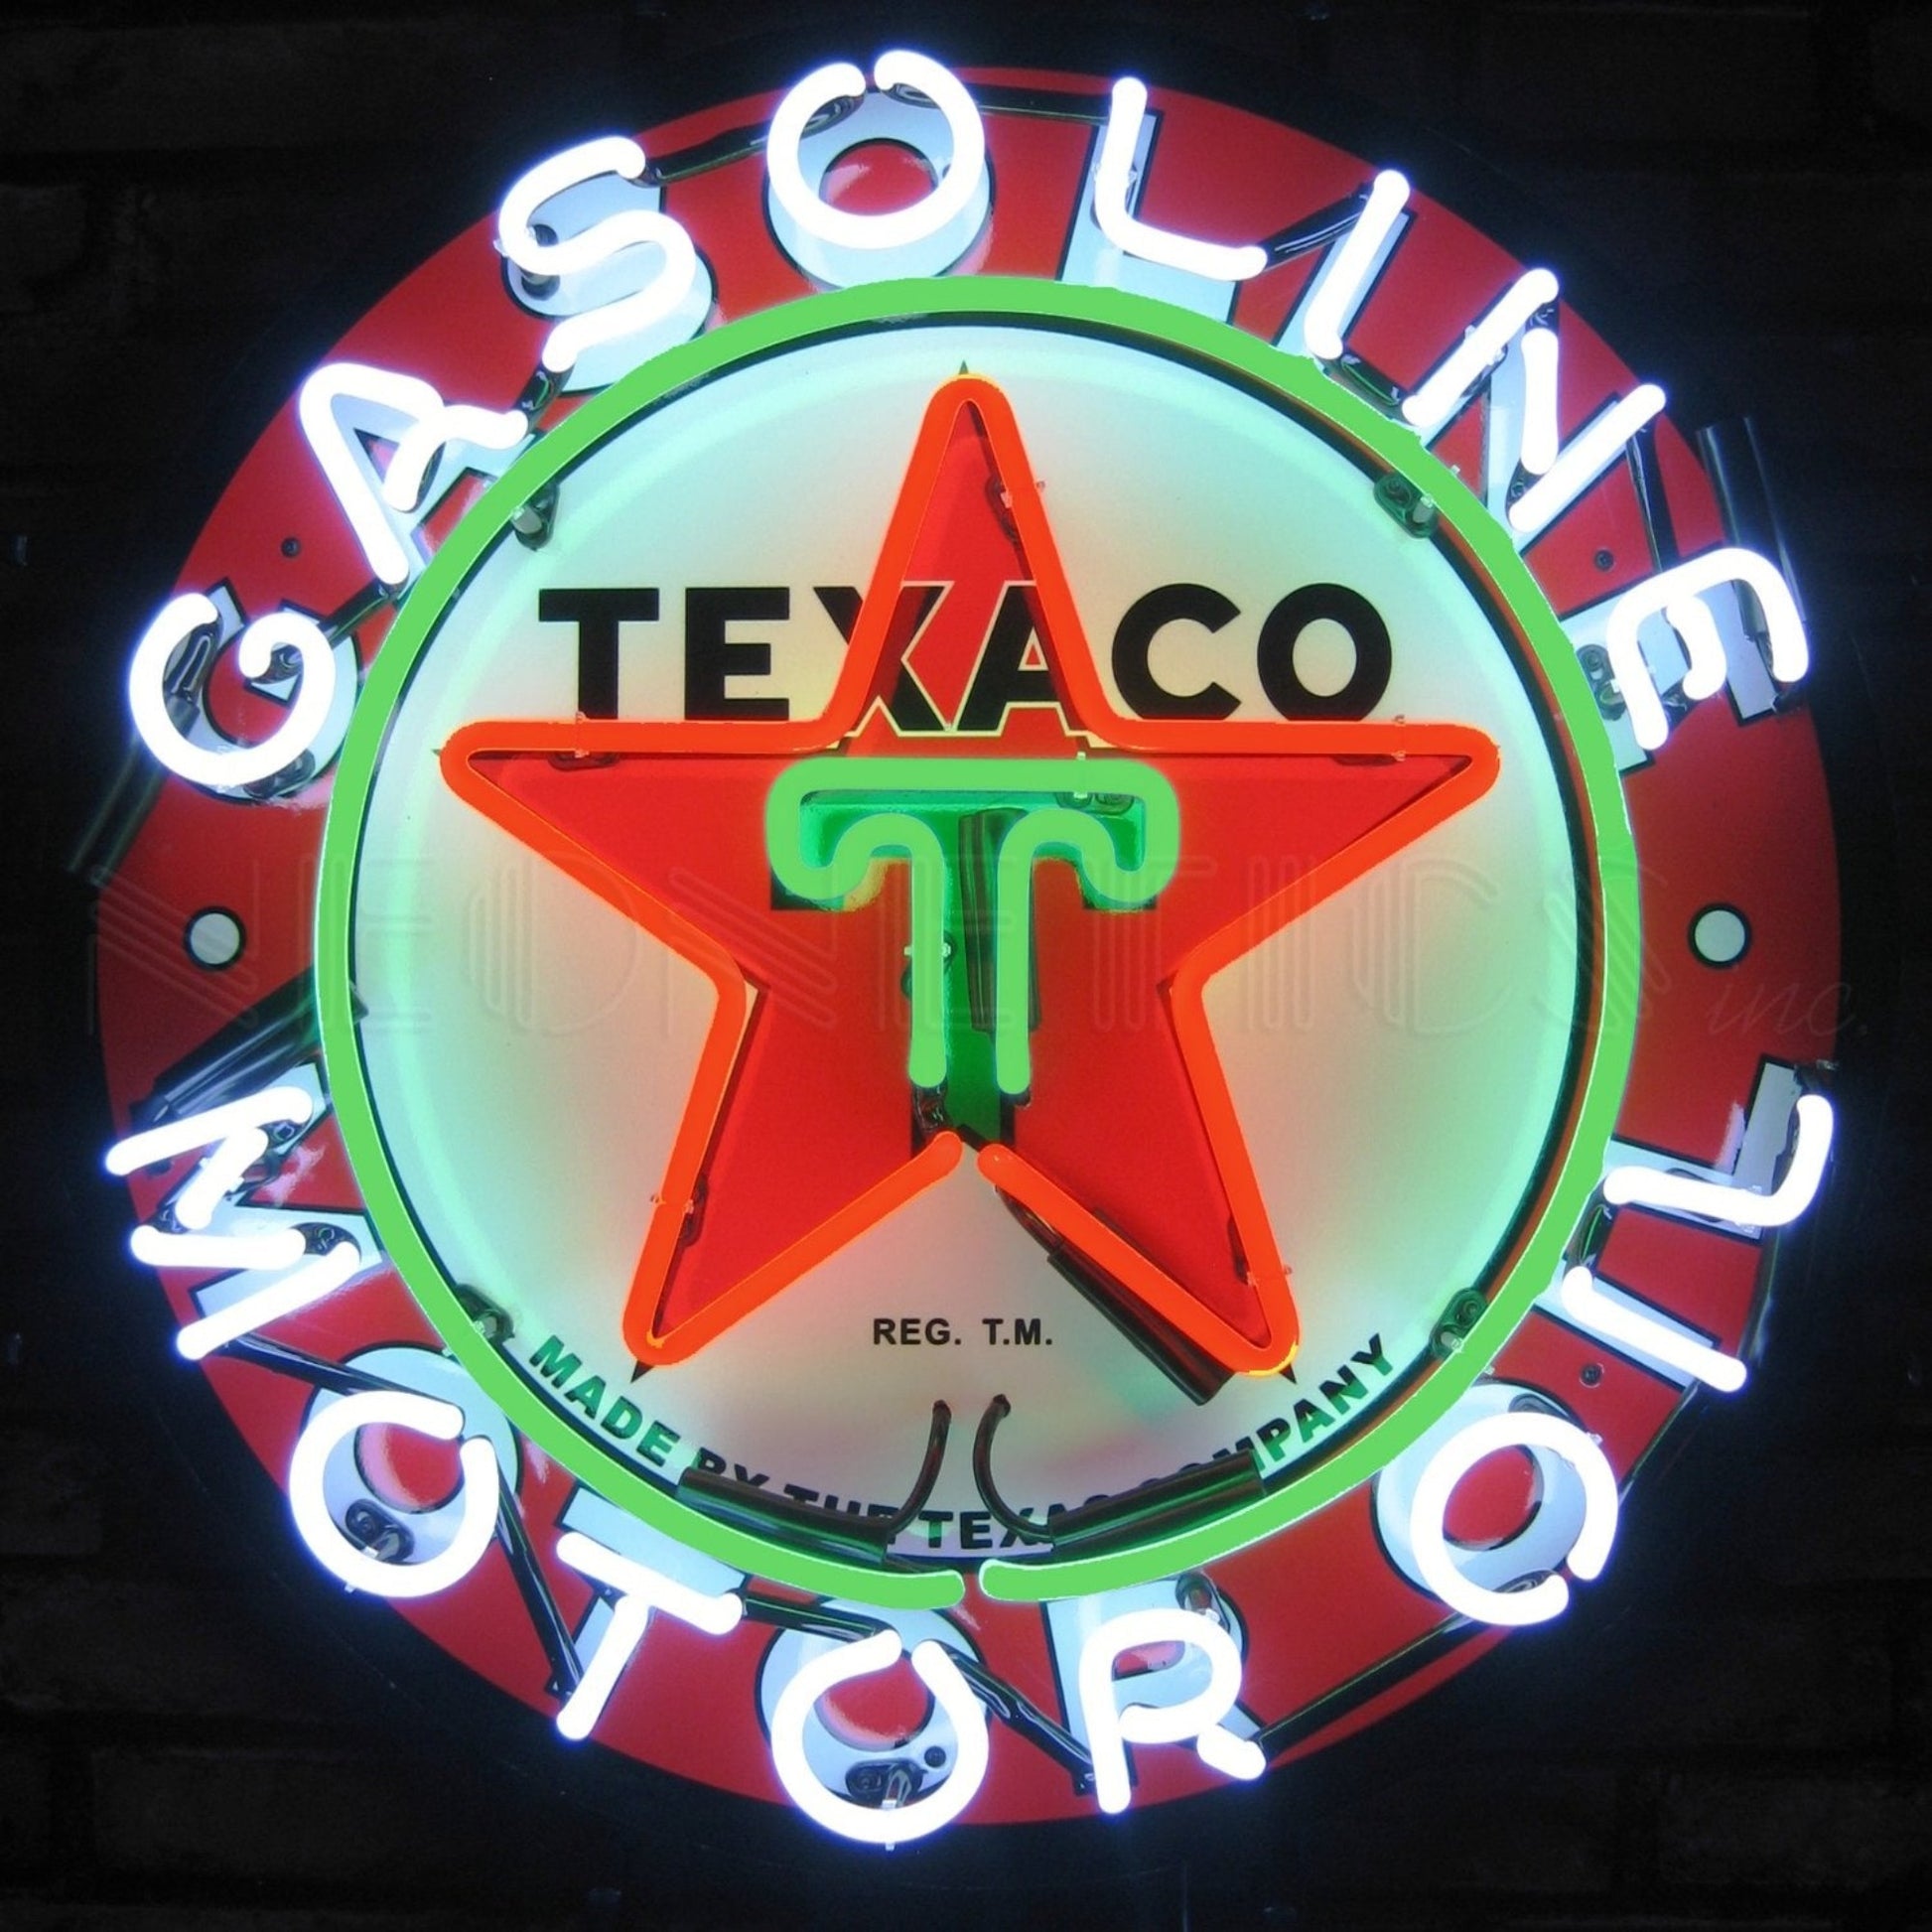 Texaco Motor Oil Neon Sign with a vibrant display of red, green, and white lights, a retro tribute to the classic American oil company.